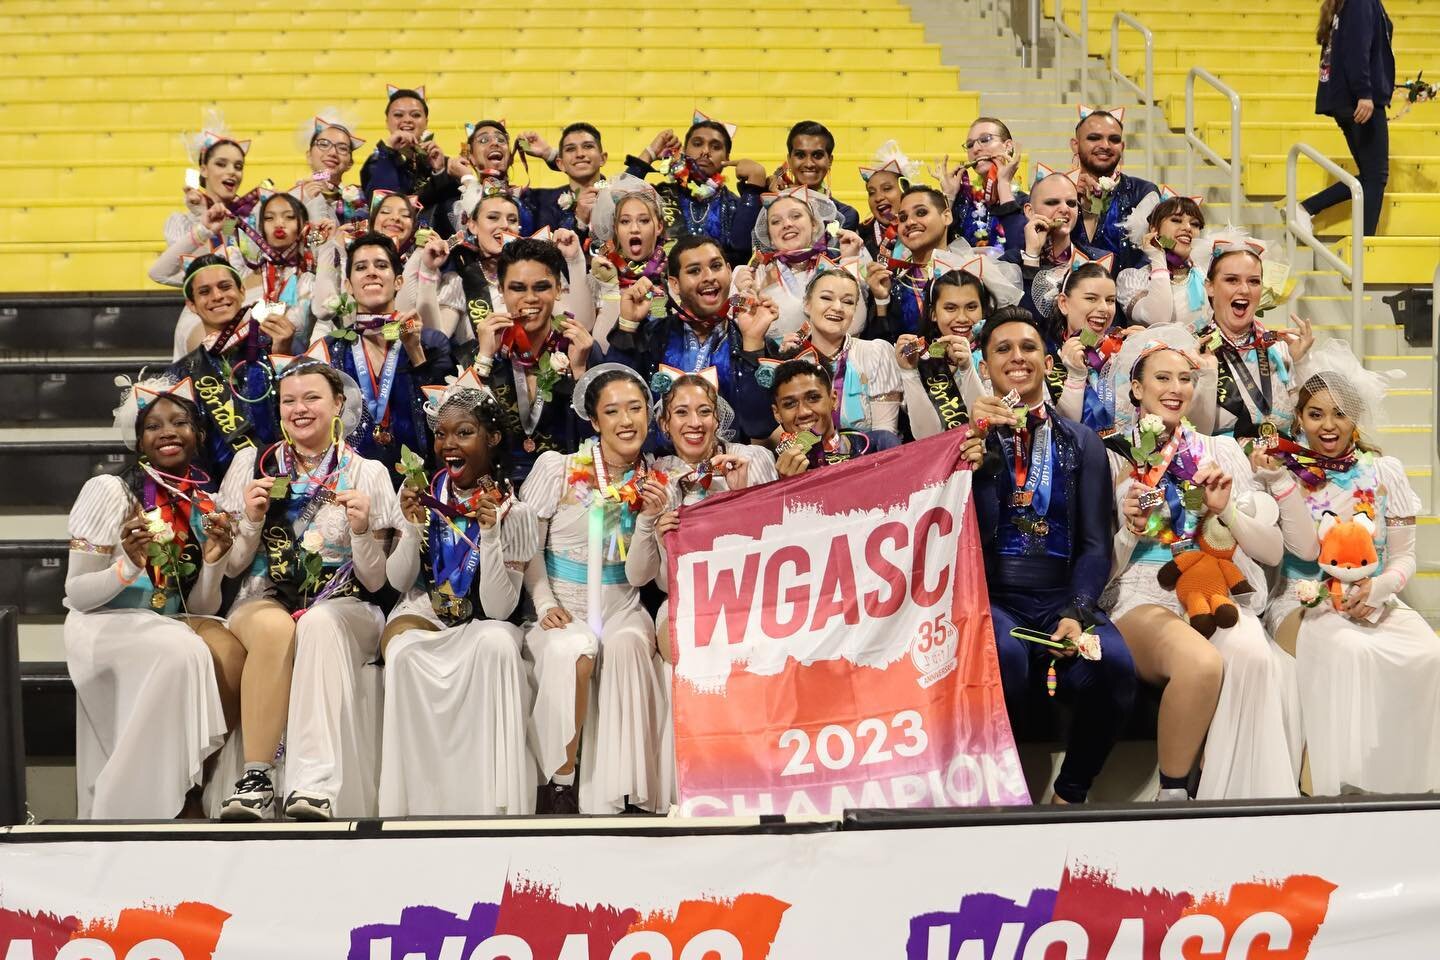 Our last wedding ceremony of the season took place this past Sunday at the 2023 WGASC Championships!!! 
Thank you to the amazing staff at WGASC for hosting such a great event.  Thank you to our fans who voted us as the IO Fan Favorite.  Congratulatio